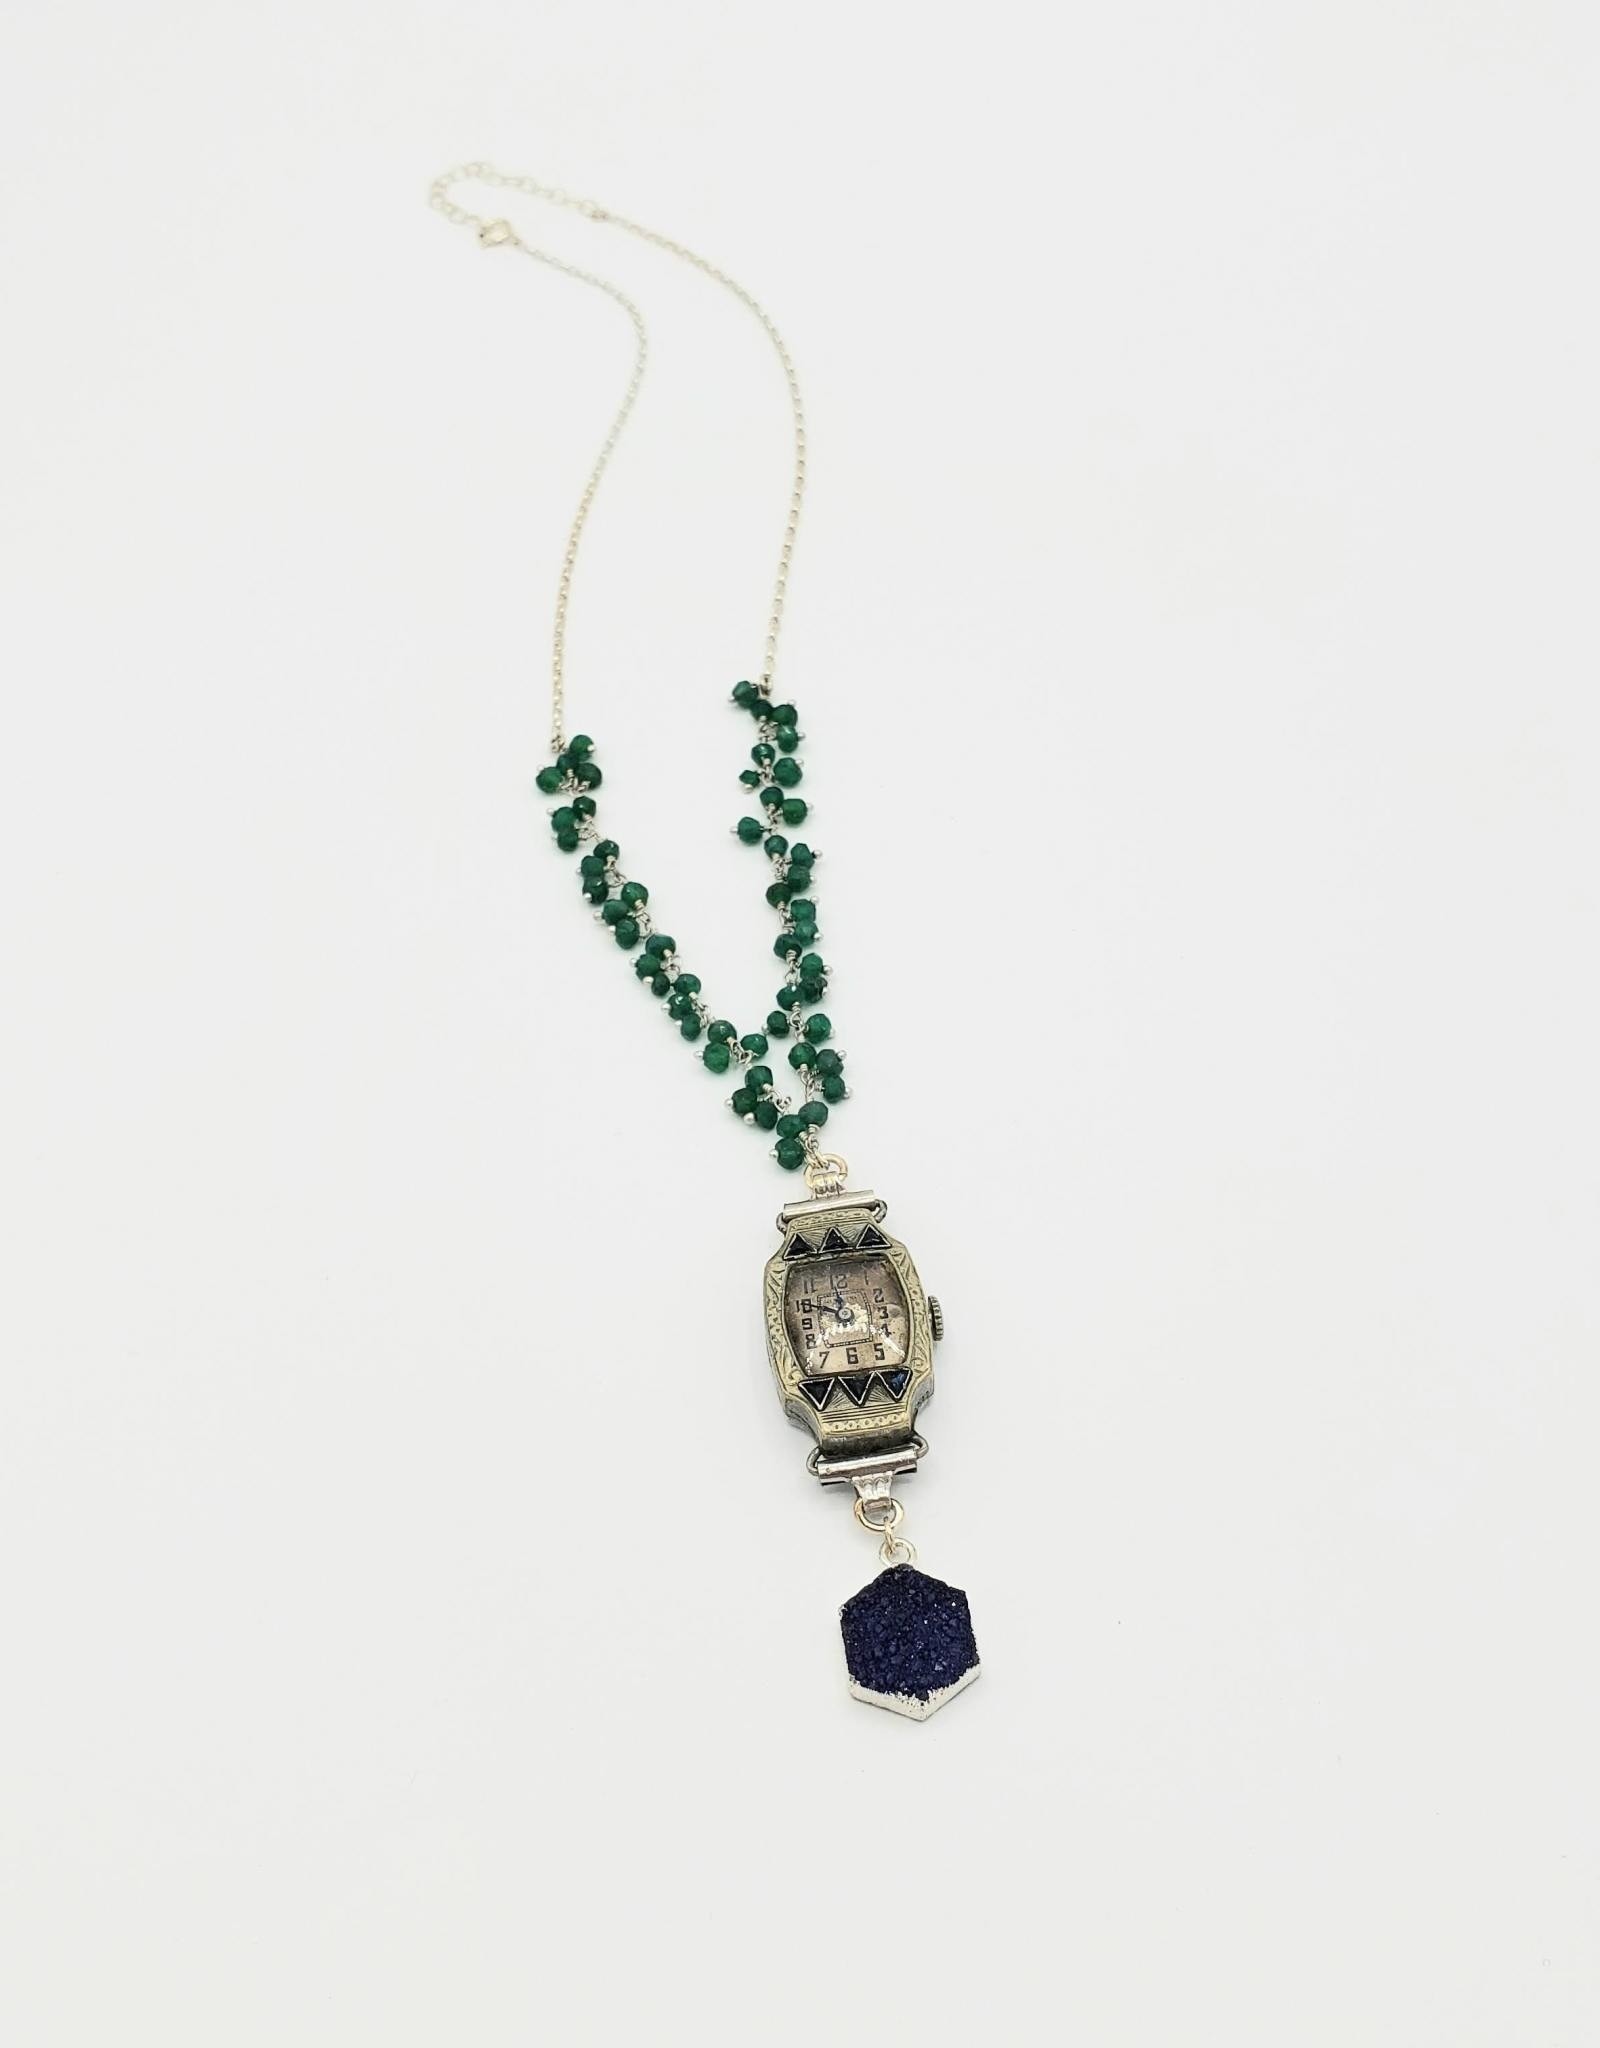 Redux Vintage Watch, Druzy Indigo Quartz Hexagon, Tiny Faceted Green Clusters on Sterling Silver Chain